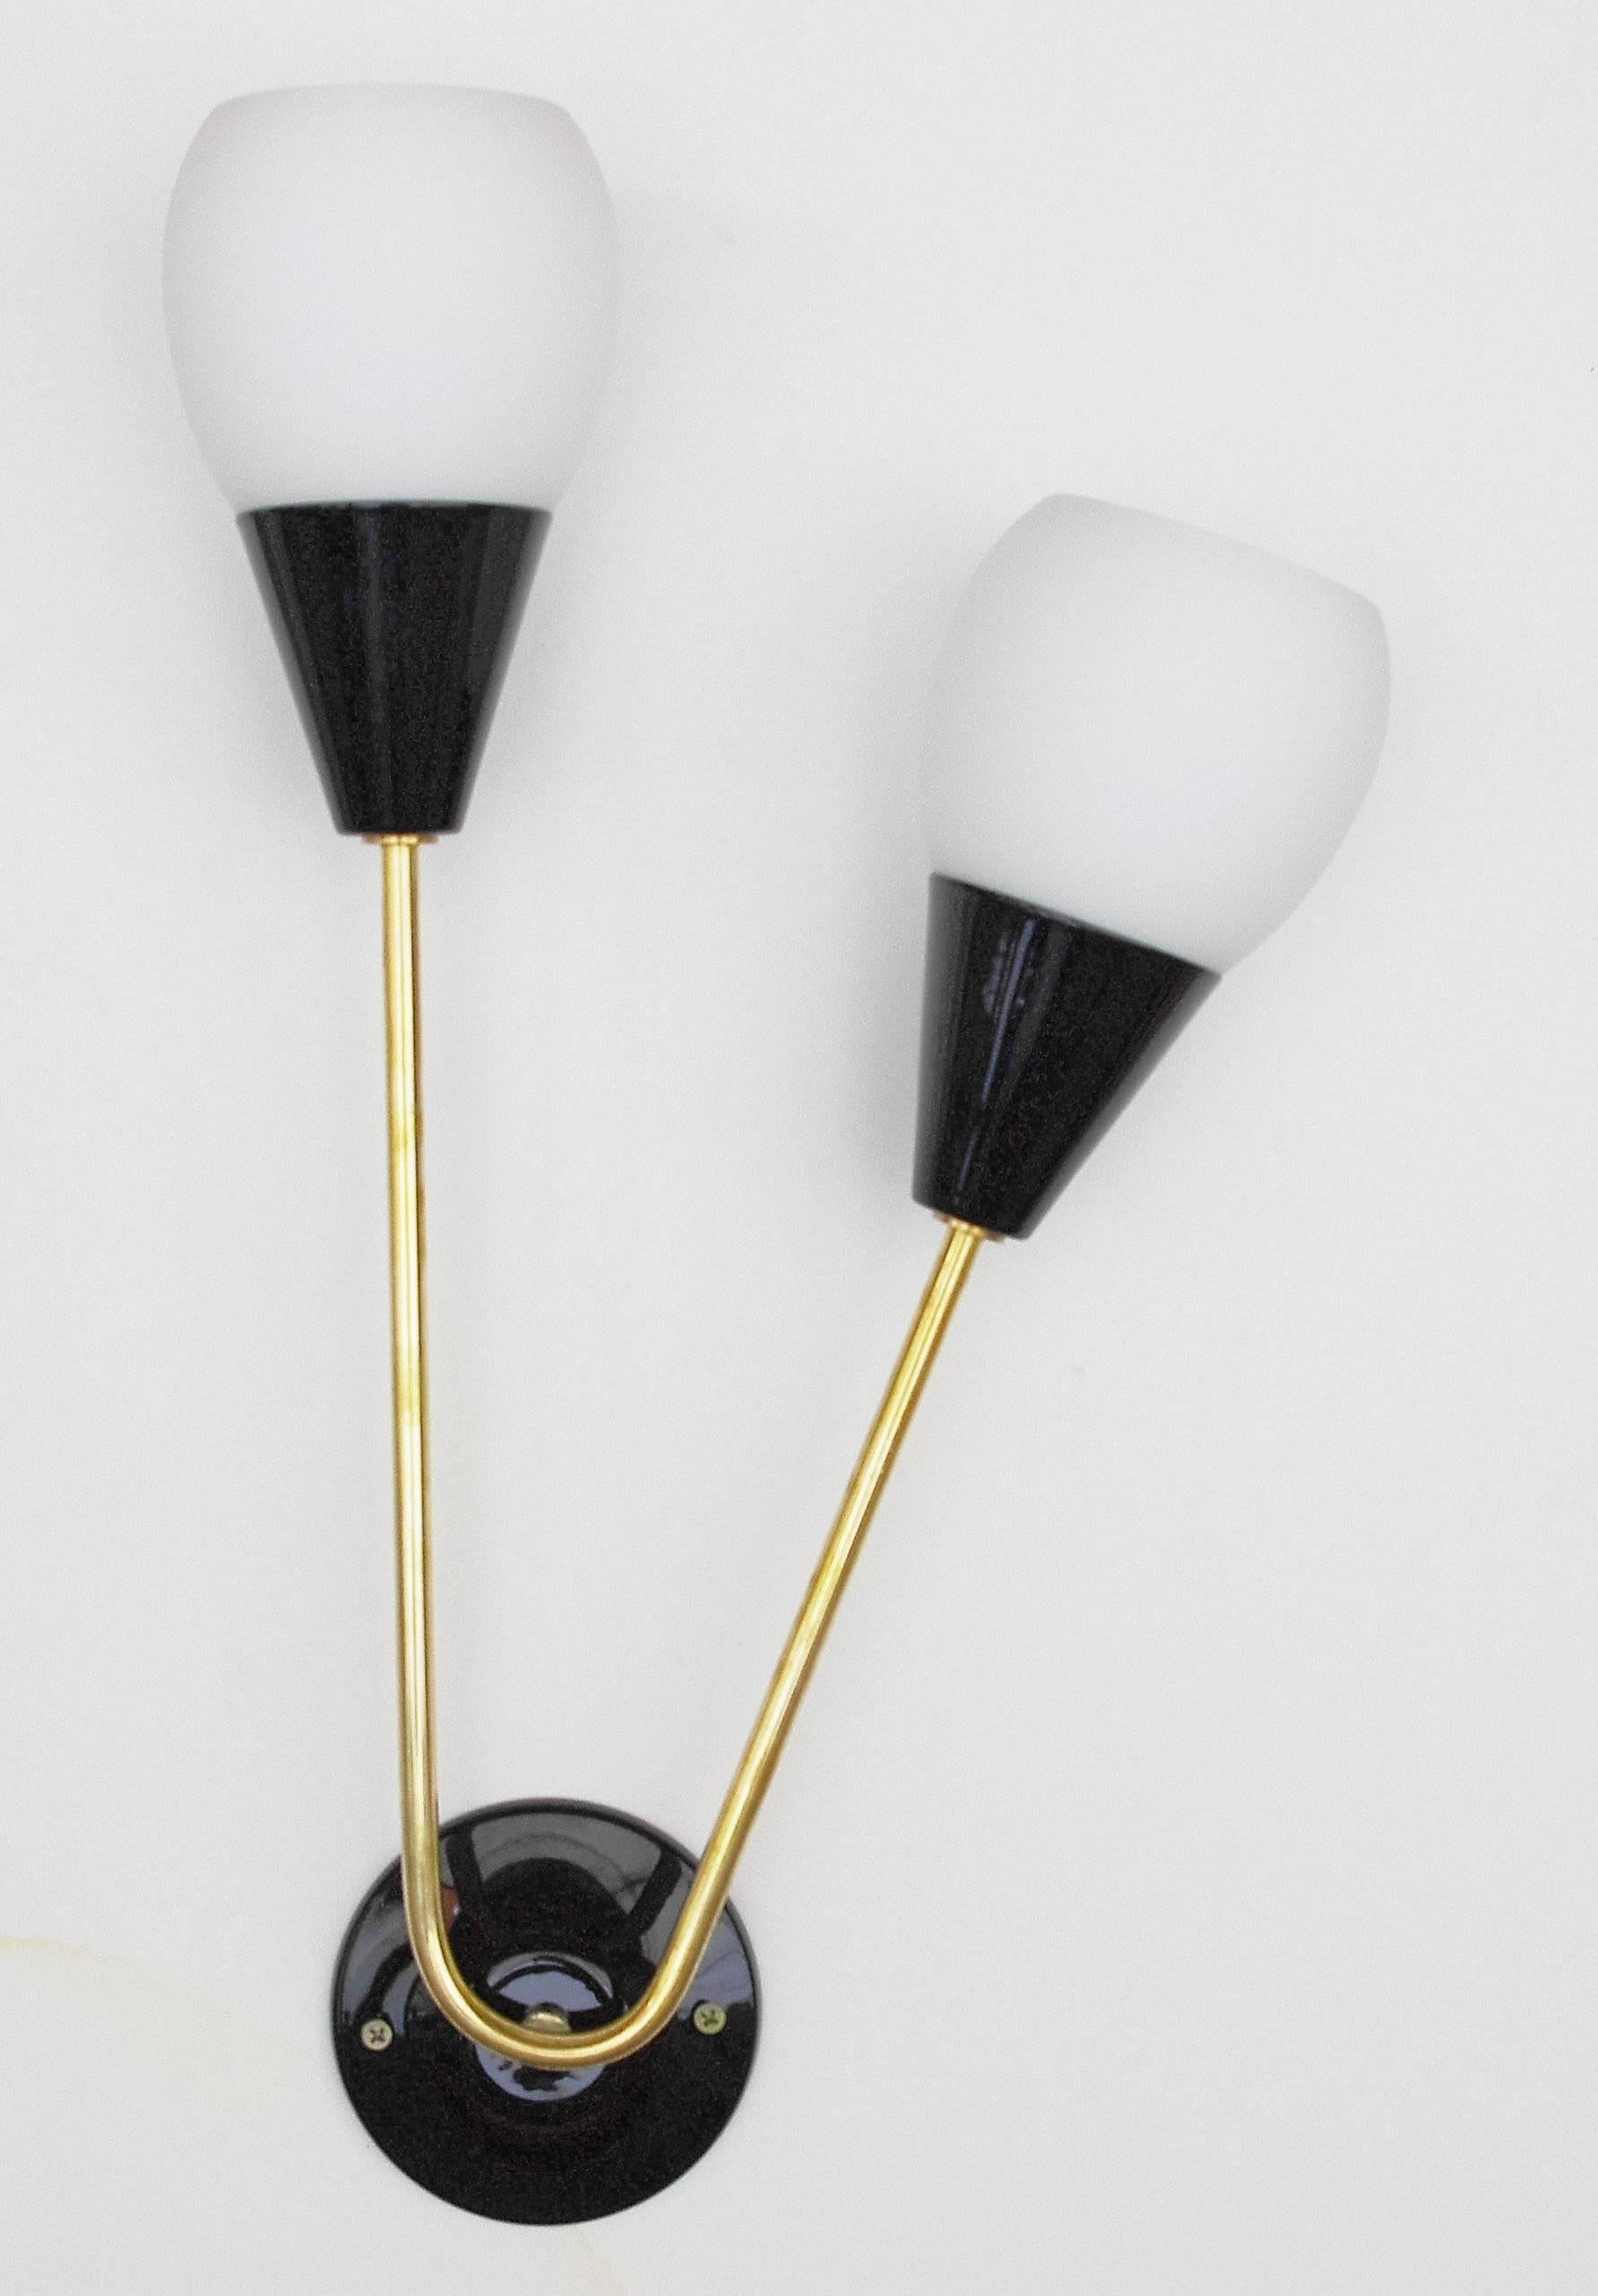 Limited Edition Italian wall lights with frosted white Murano glasses and black enameled brass, mounted on brass frames/ Designed by Fabio Bergomi for Fabio Ltd / Made in Italy 
2 lights / E12 or E14 type / max 40W each
Height: 21.5 inches / Width: